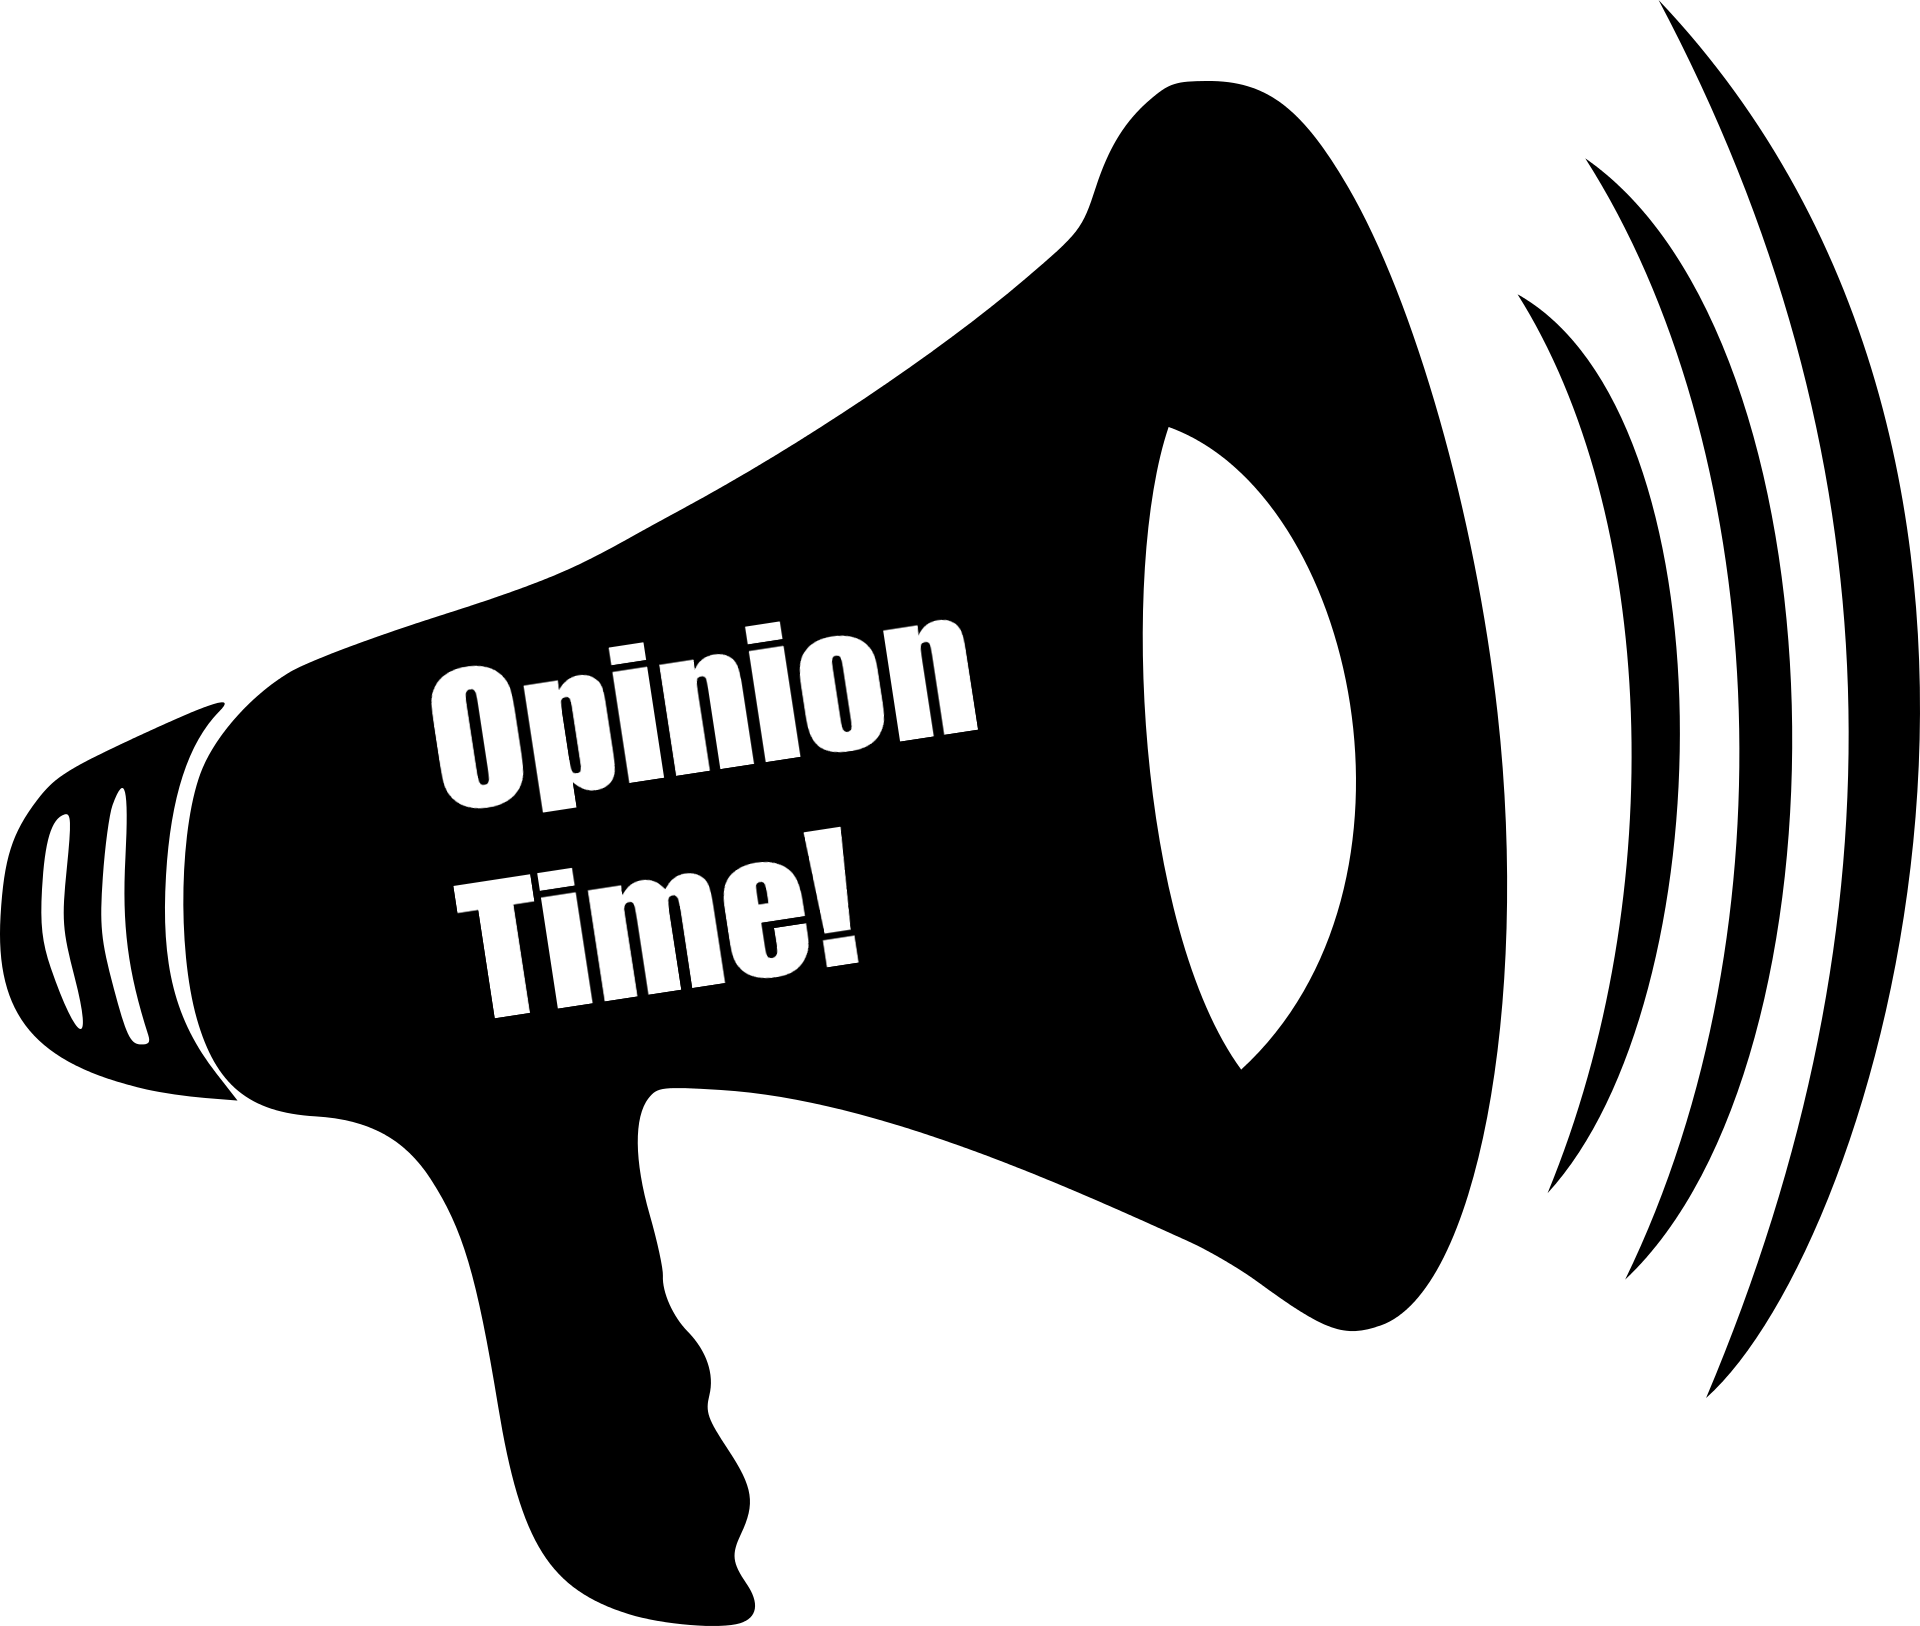 The "Opinion Time" megaphone